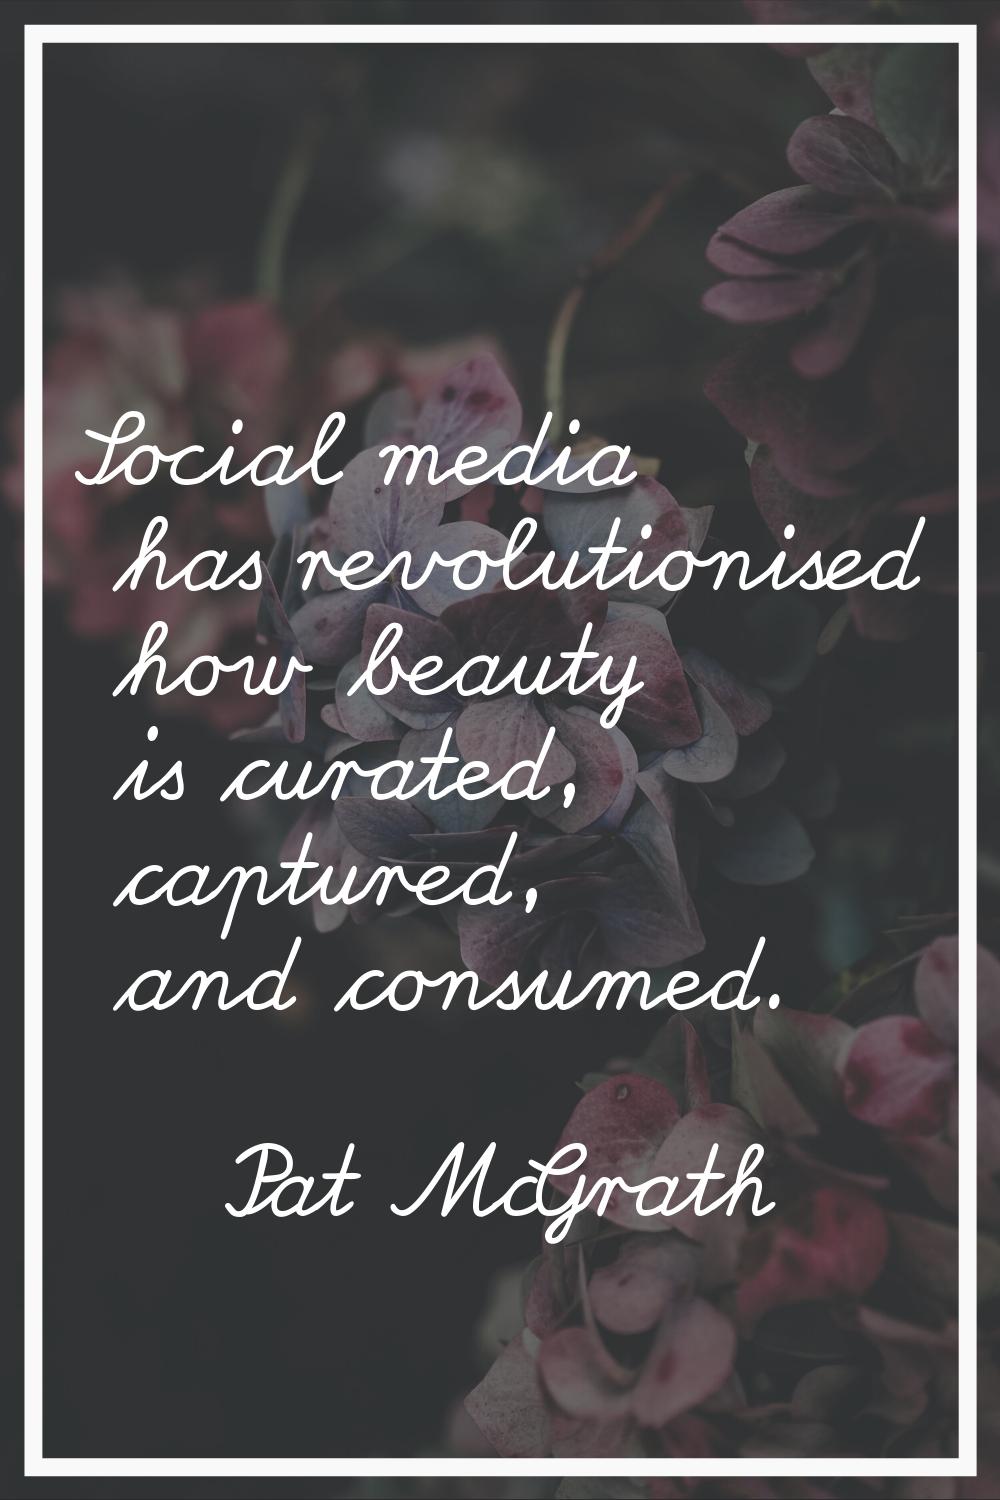 Social media has revolutionised how beauty is curated, captured, and consumed.